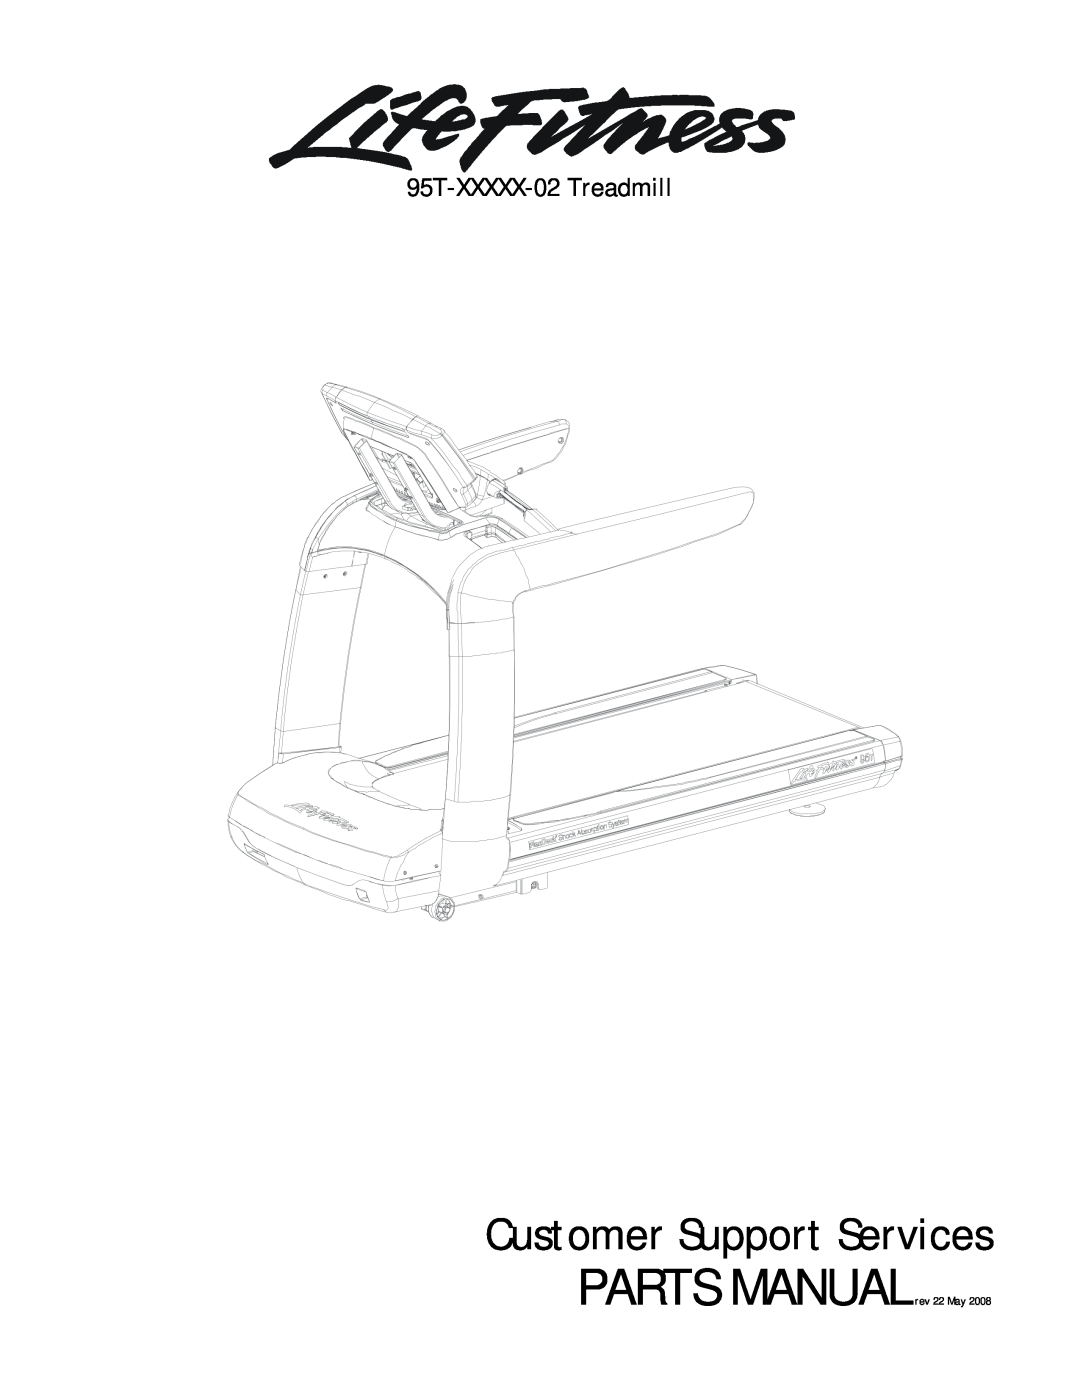 Life Fitness manual 95T-XXXXX-02 Treadmill, Customer Support Services, PARTS MANUALrev 22 May 